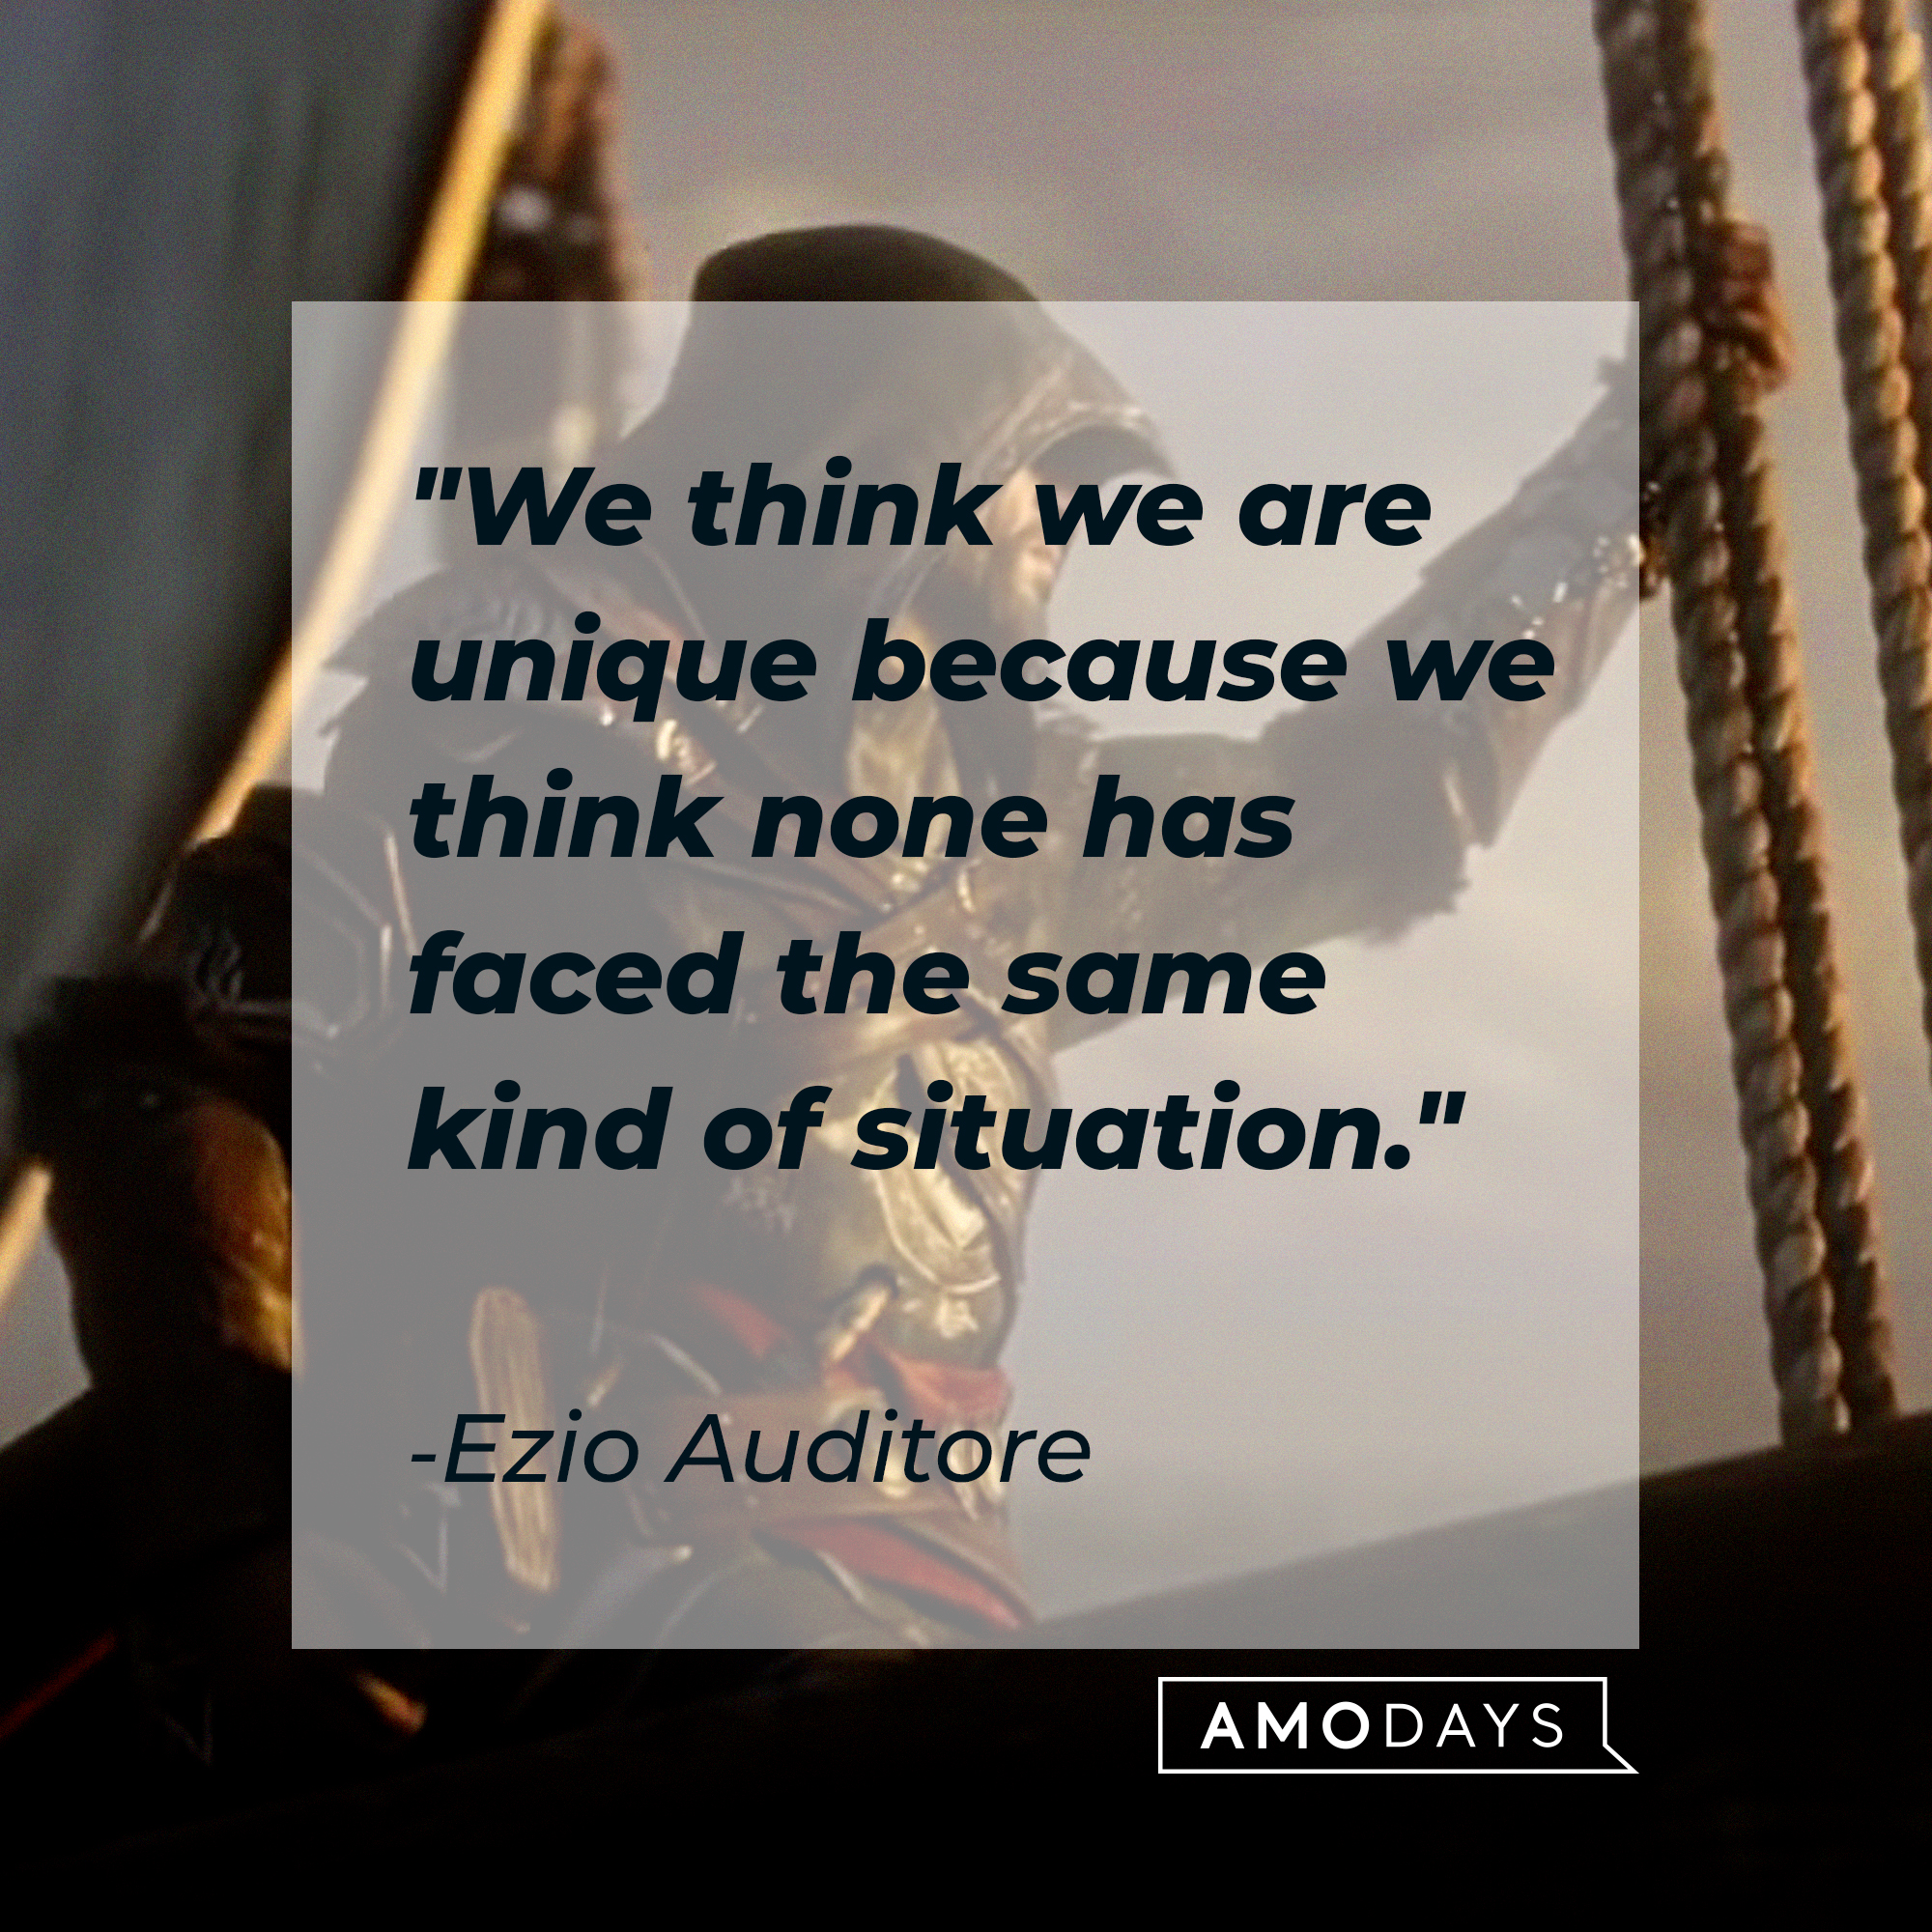 Enzo Auditore's quote: "We think we are unique because we think none has faced the same kind of situation." | Source: youtube.com/UbisoftNA